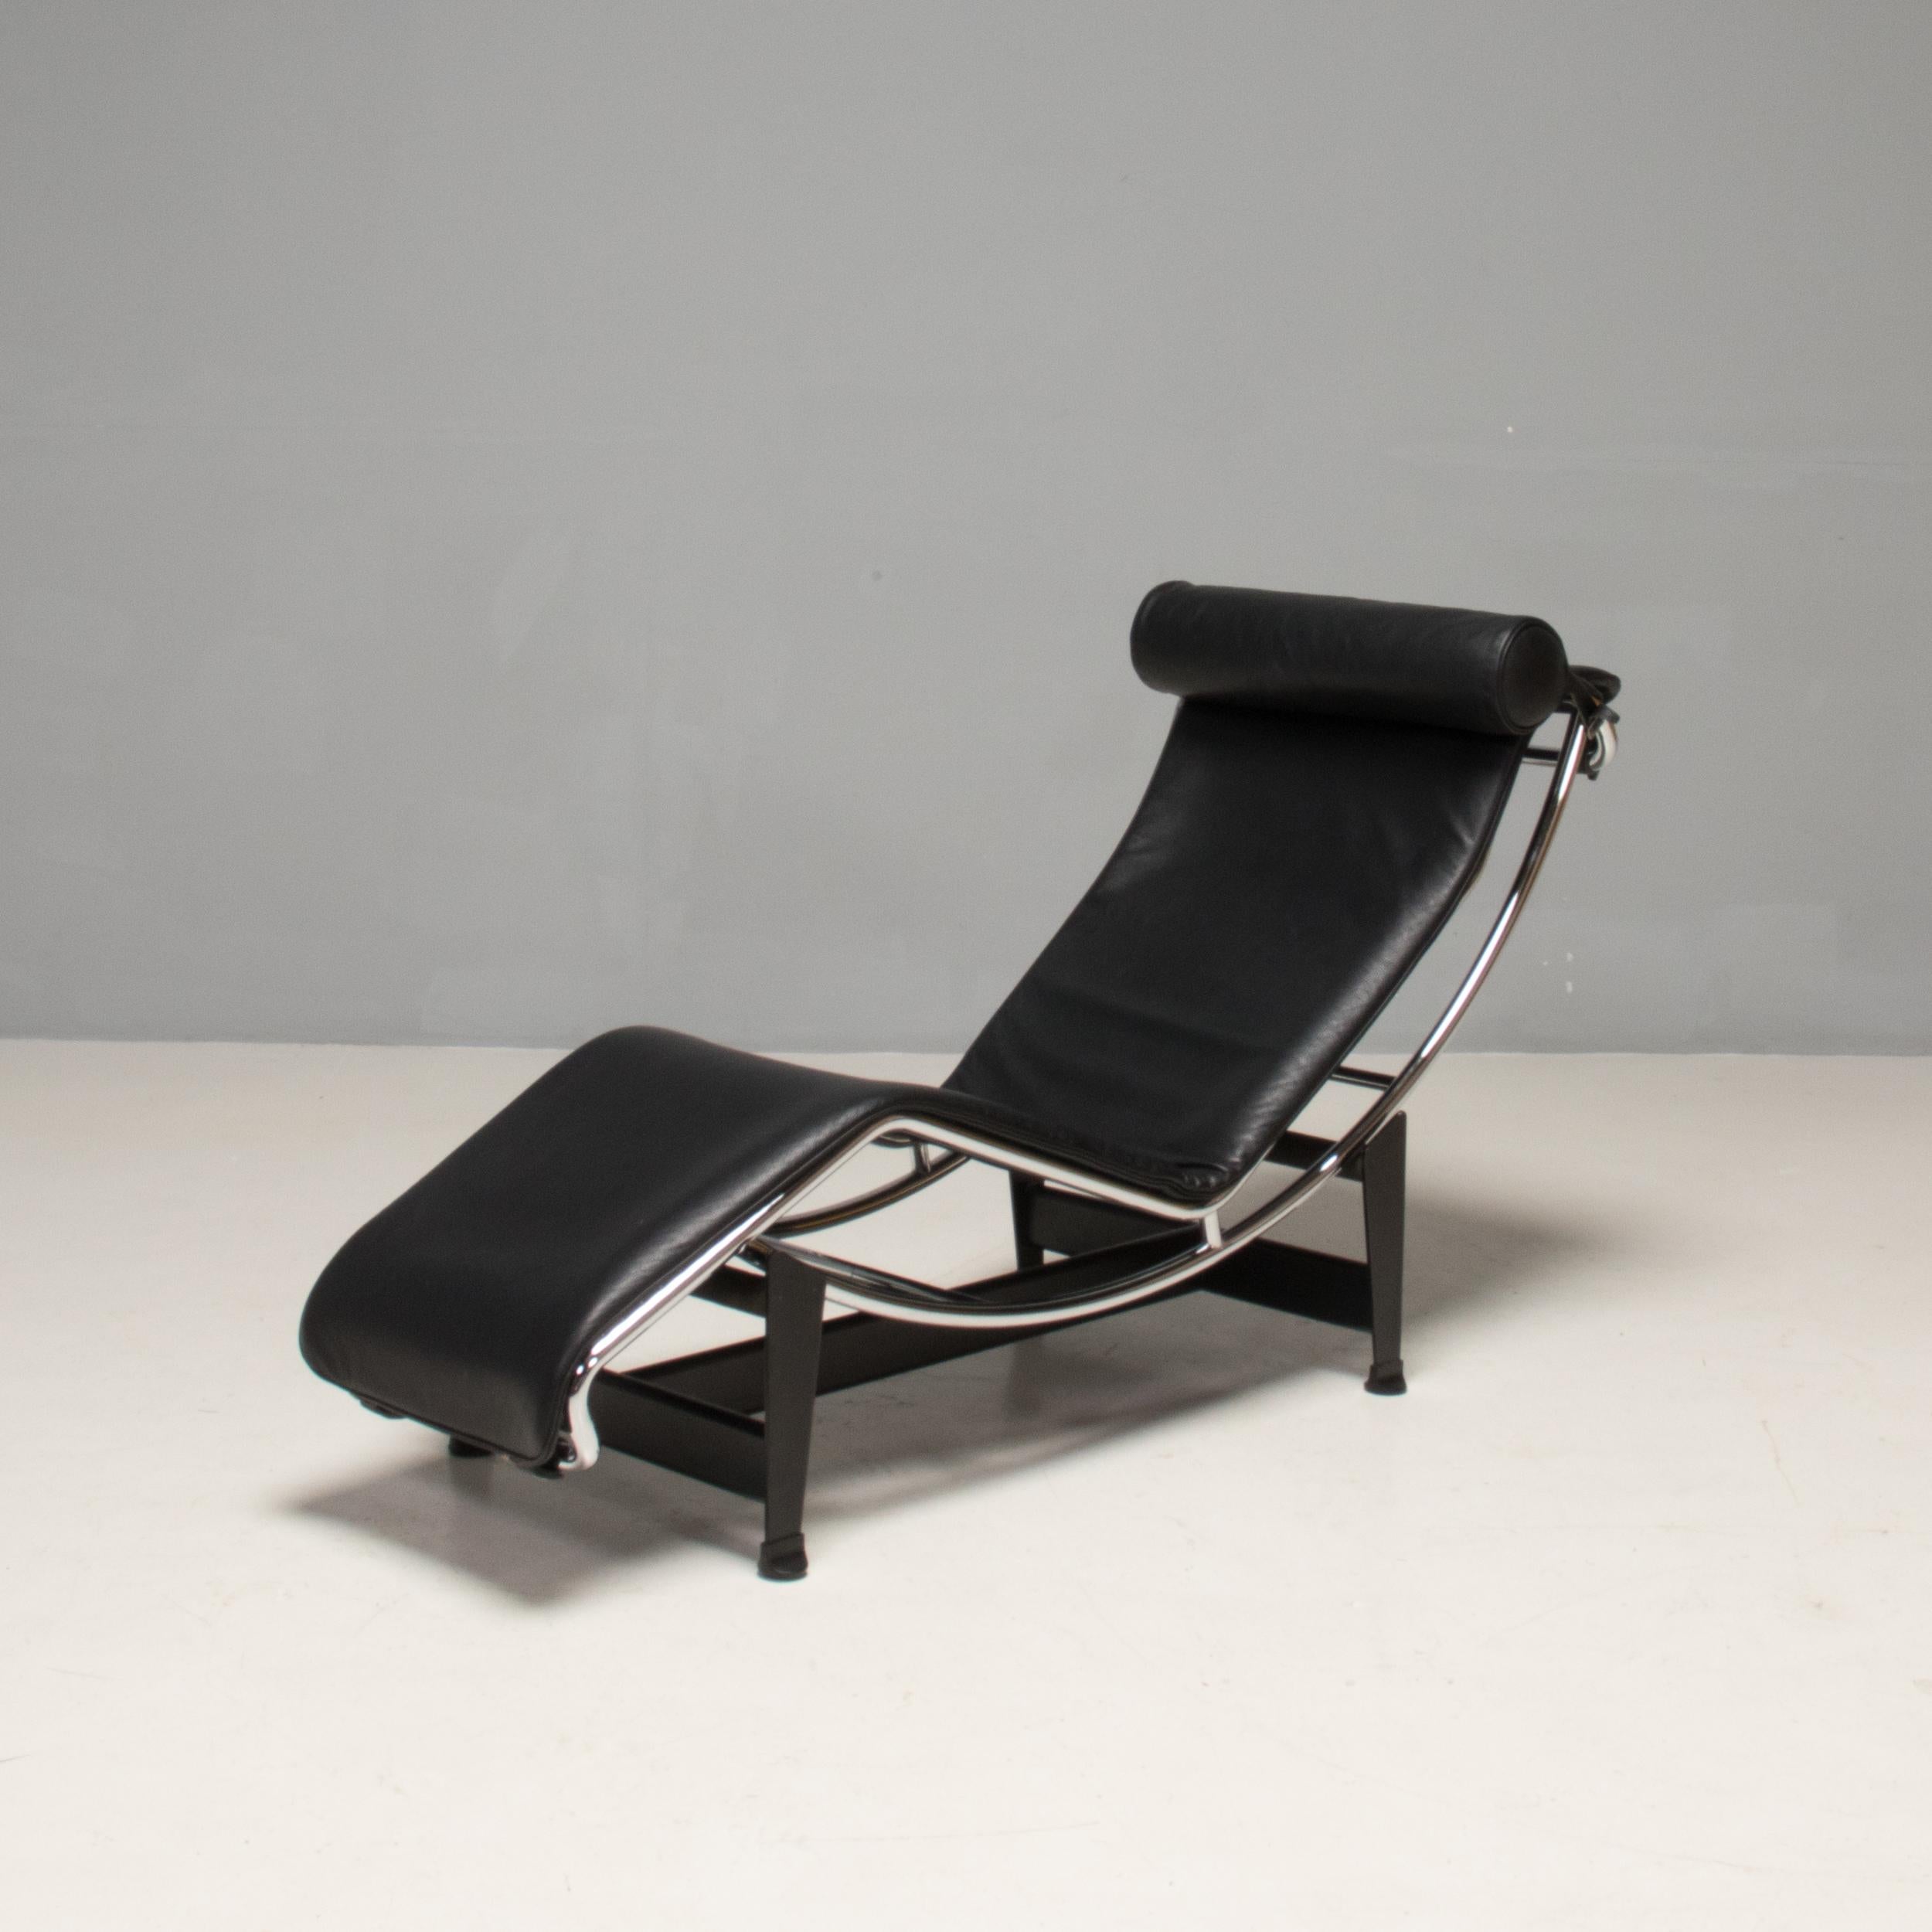 Now known as the 4 Chaise Longue à Reglage Continu, the LC4 chaise longue was originally introduced at the Salon d’Automne in 1929 by the designers Le Corbusier, Pierre Jeanneret and Charlotte Perriand.

Since then the LC4 chaise has become one of